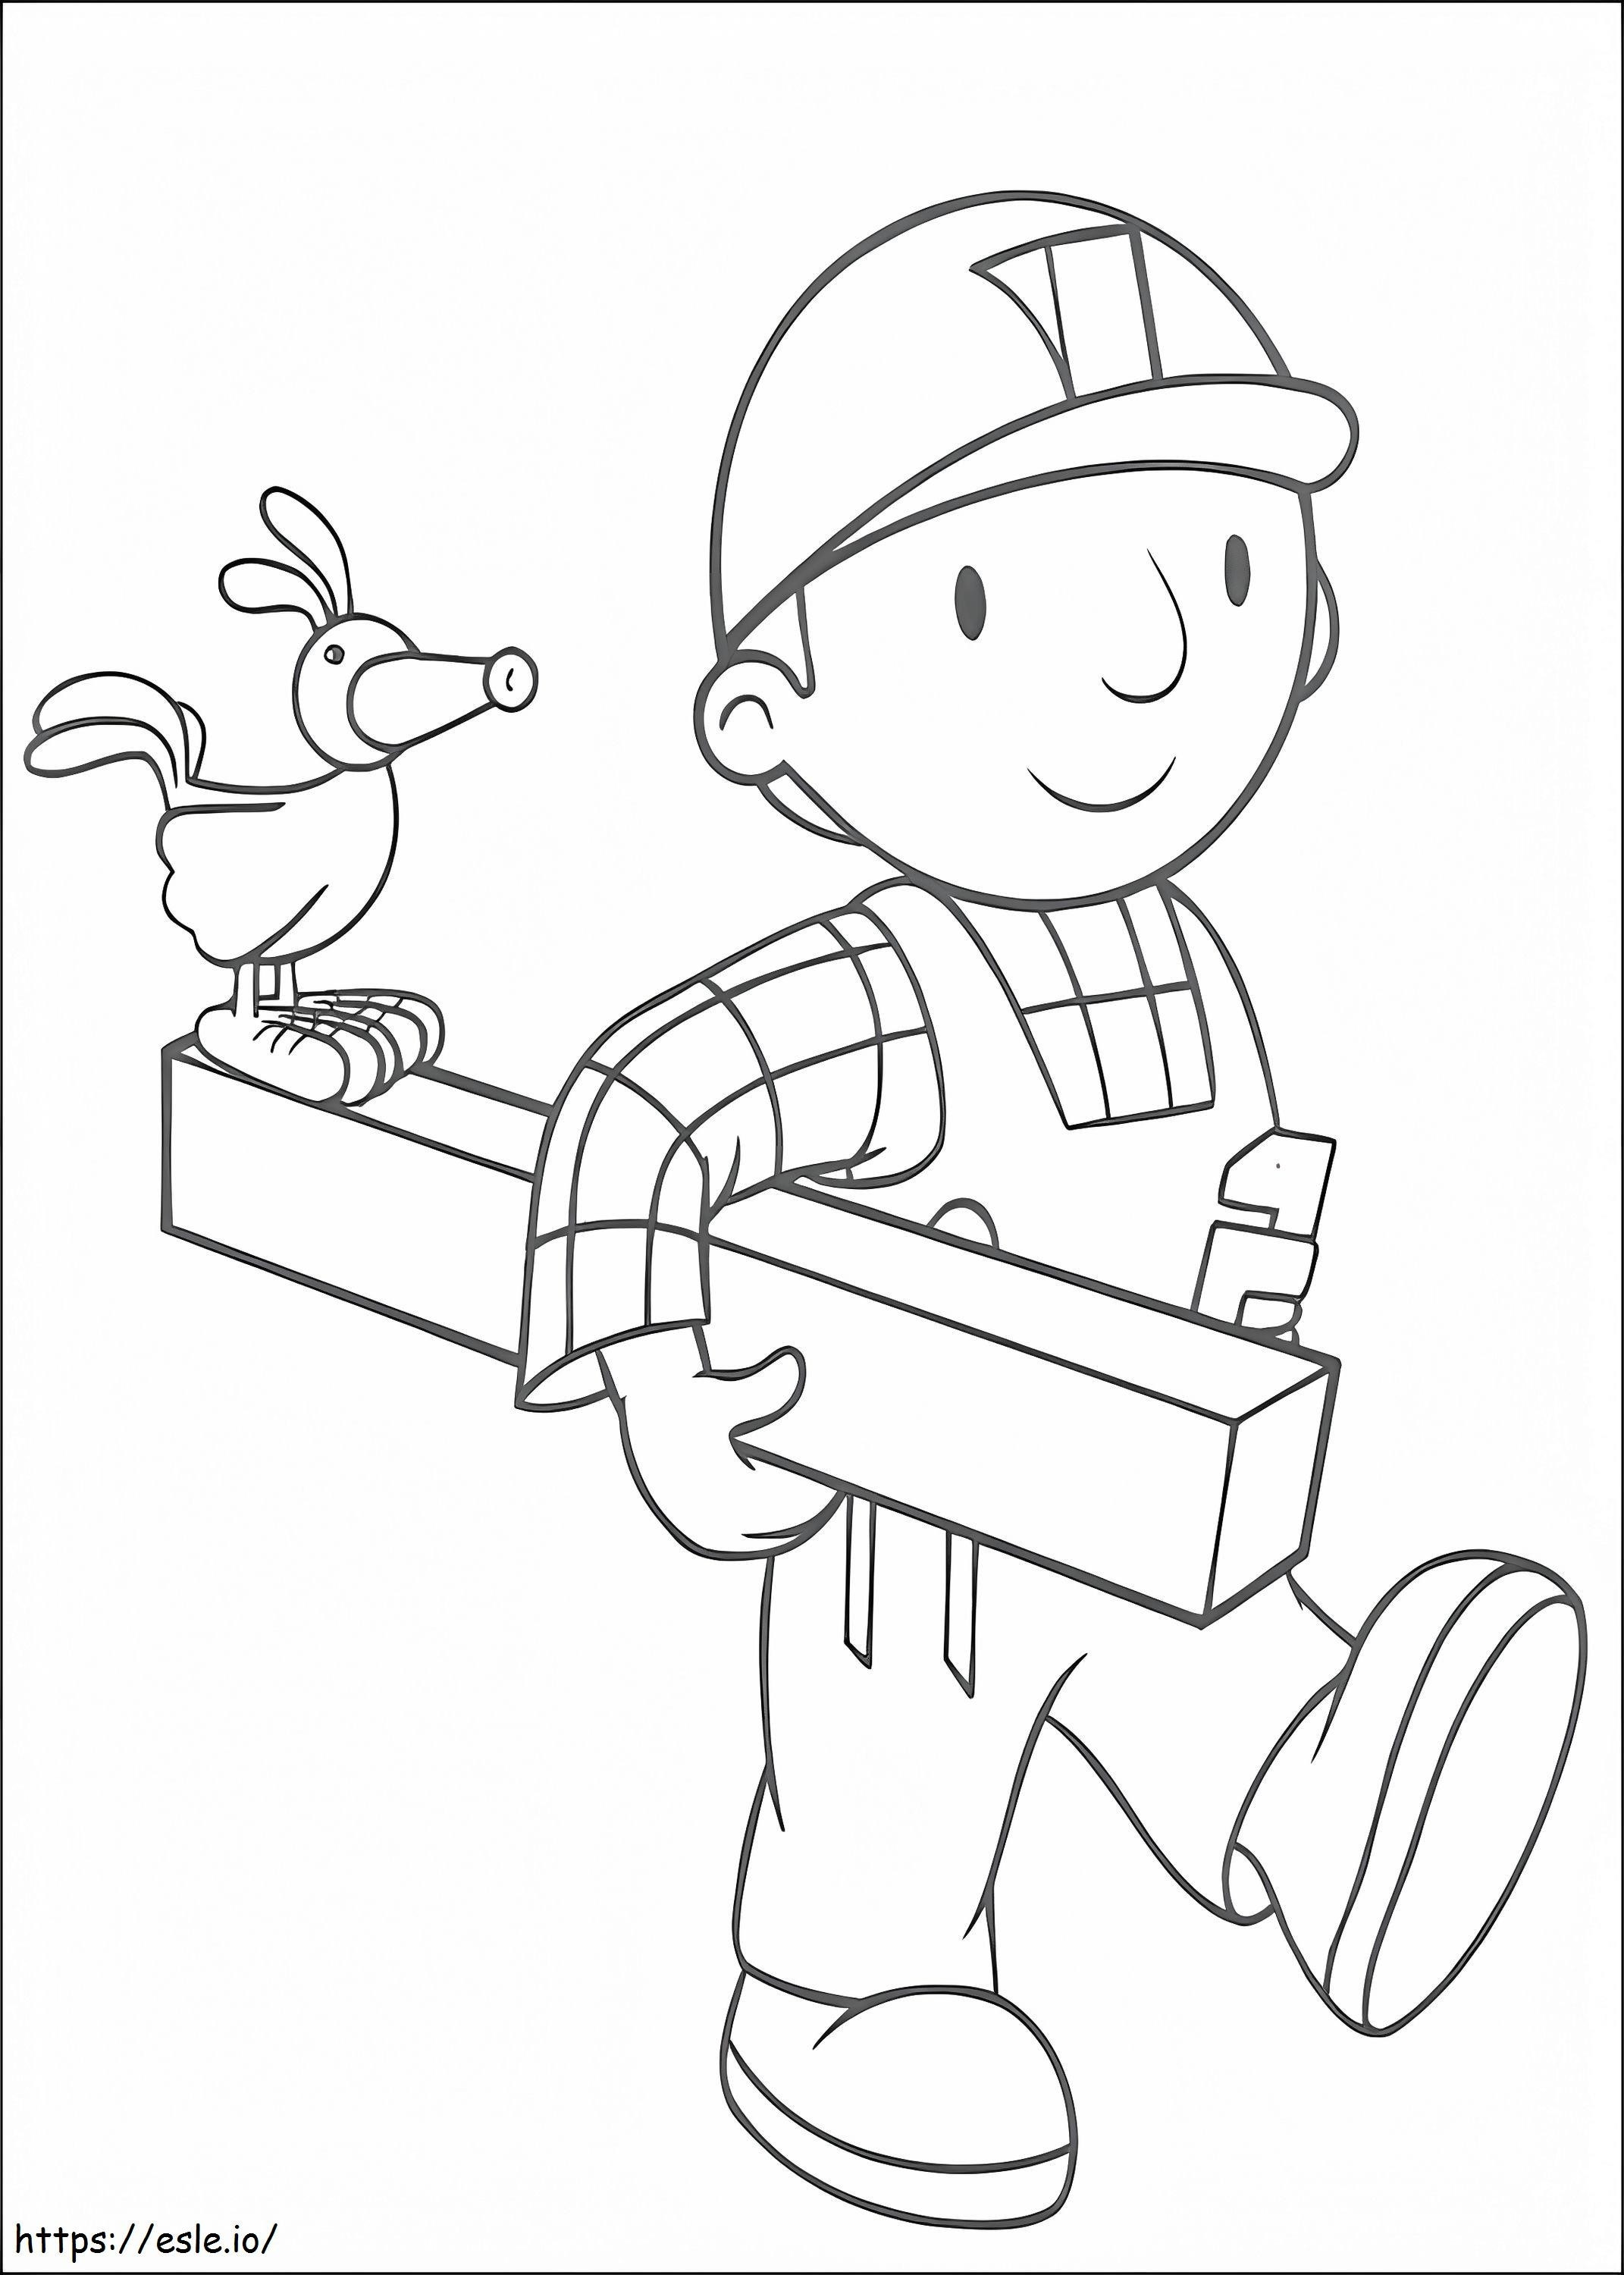 Bob And Bird A4 coloring page